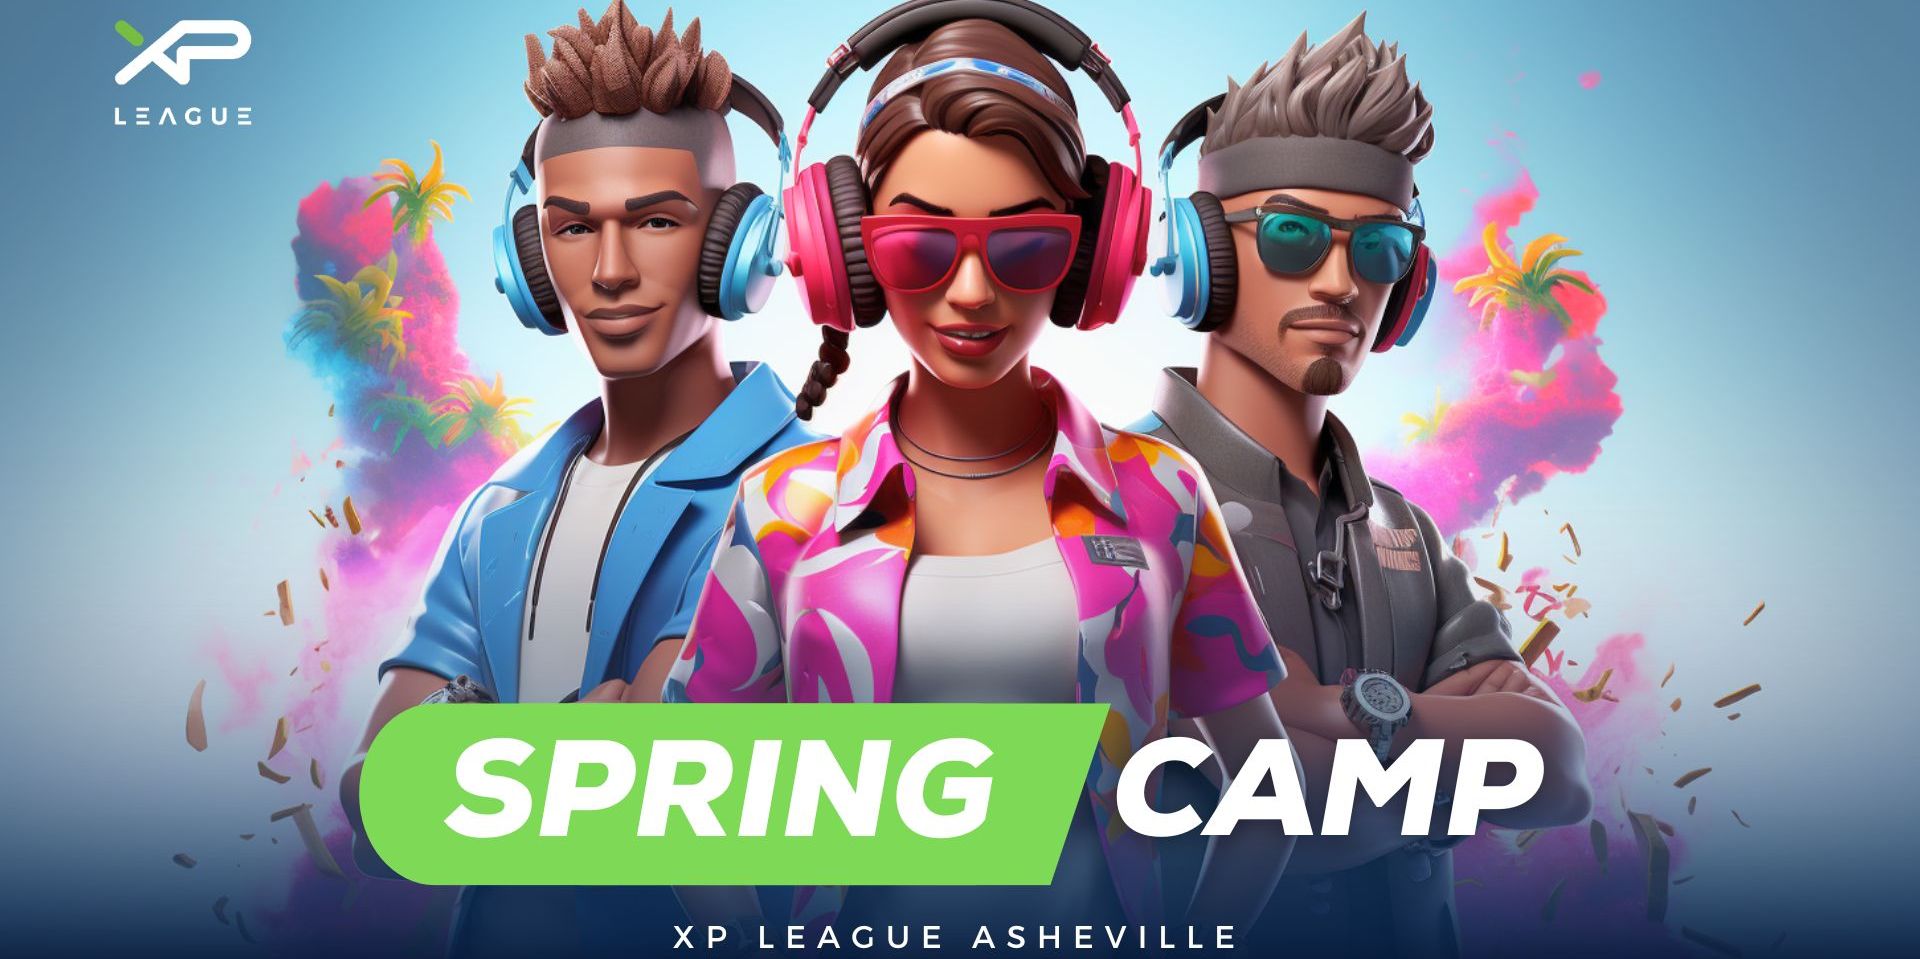 School's out - Day Camp! XP League Asheville promotional image